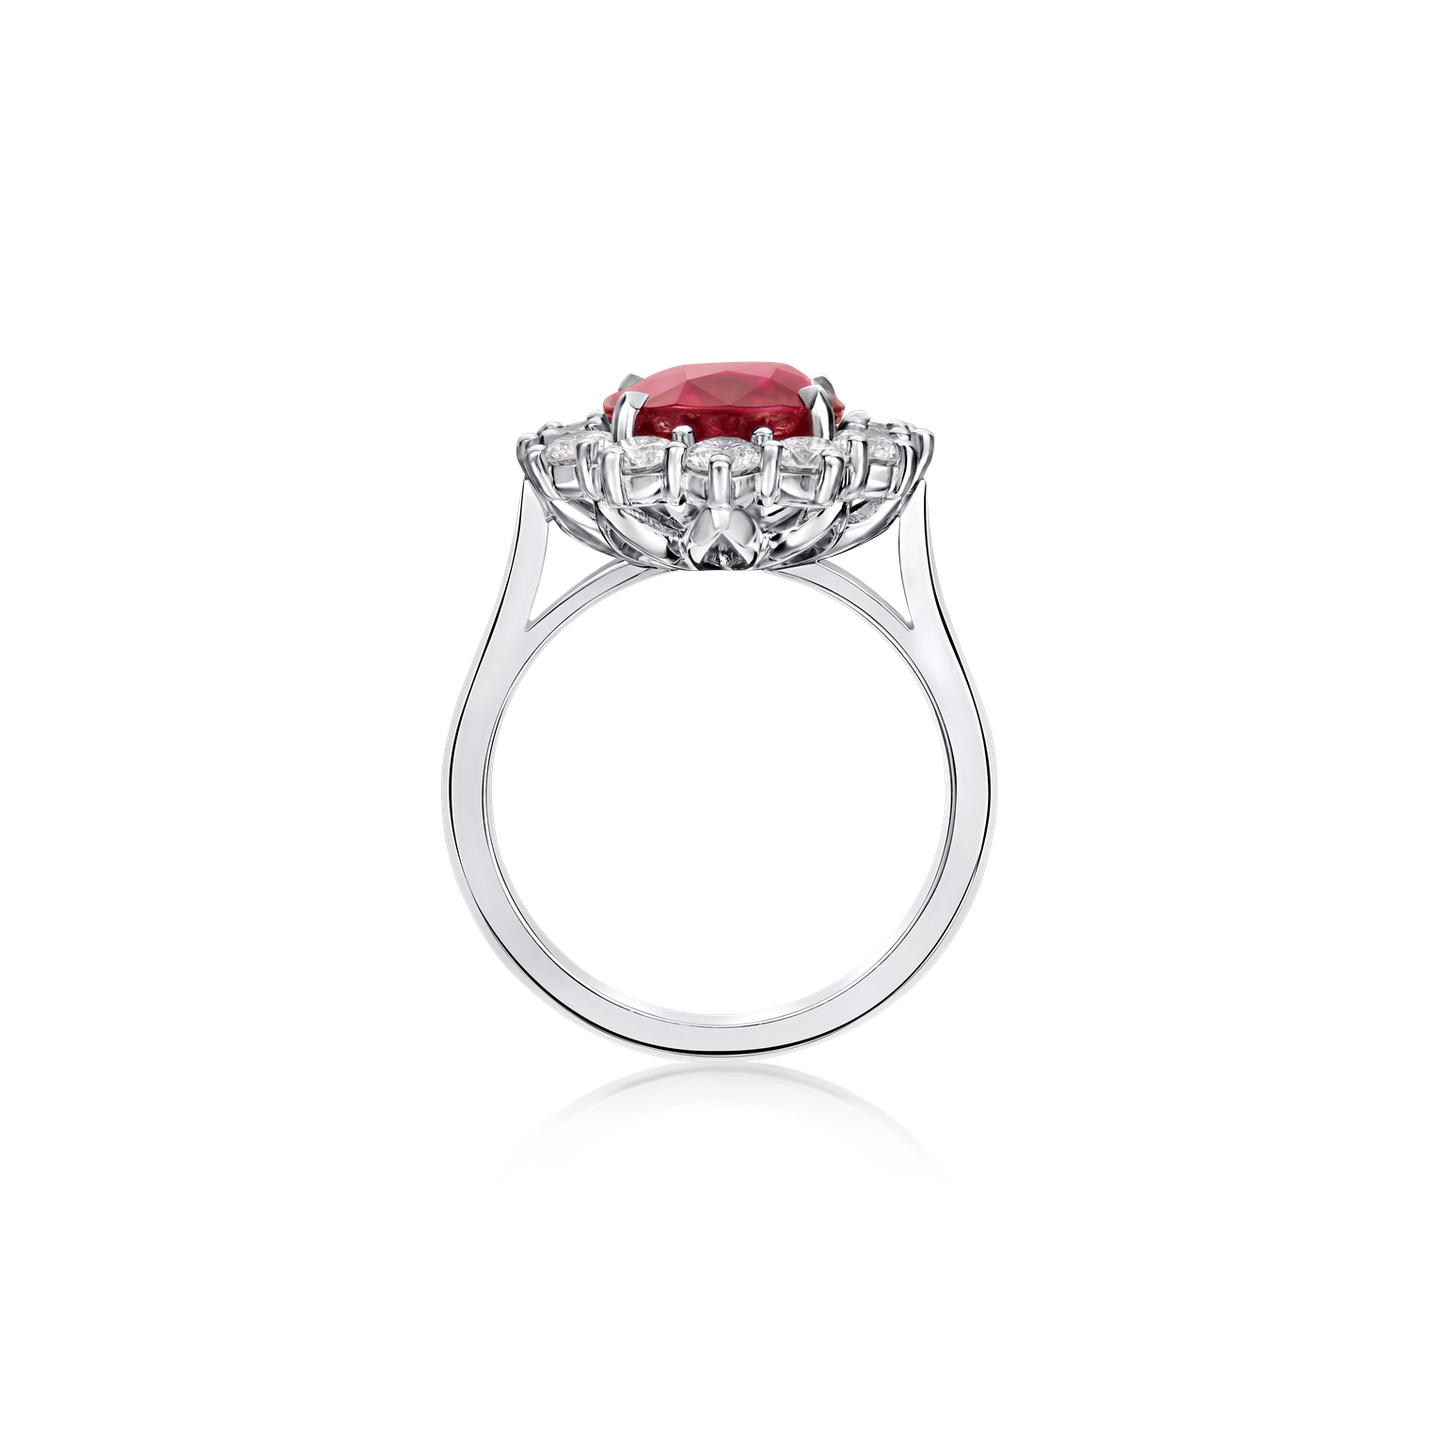 4.01cts Cushion-Shape Ruby and Diamond Ravello Cluster Ring